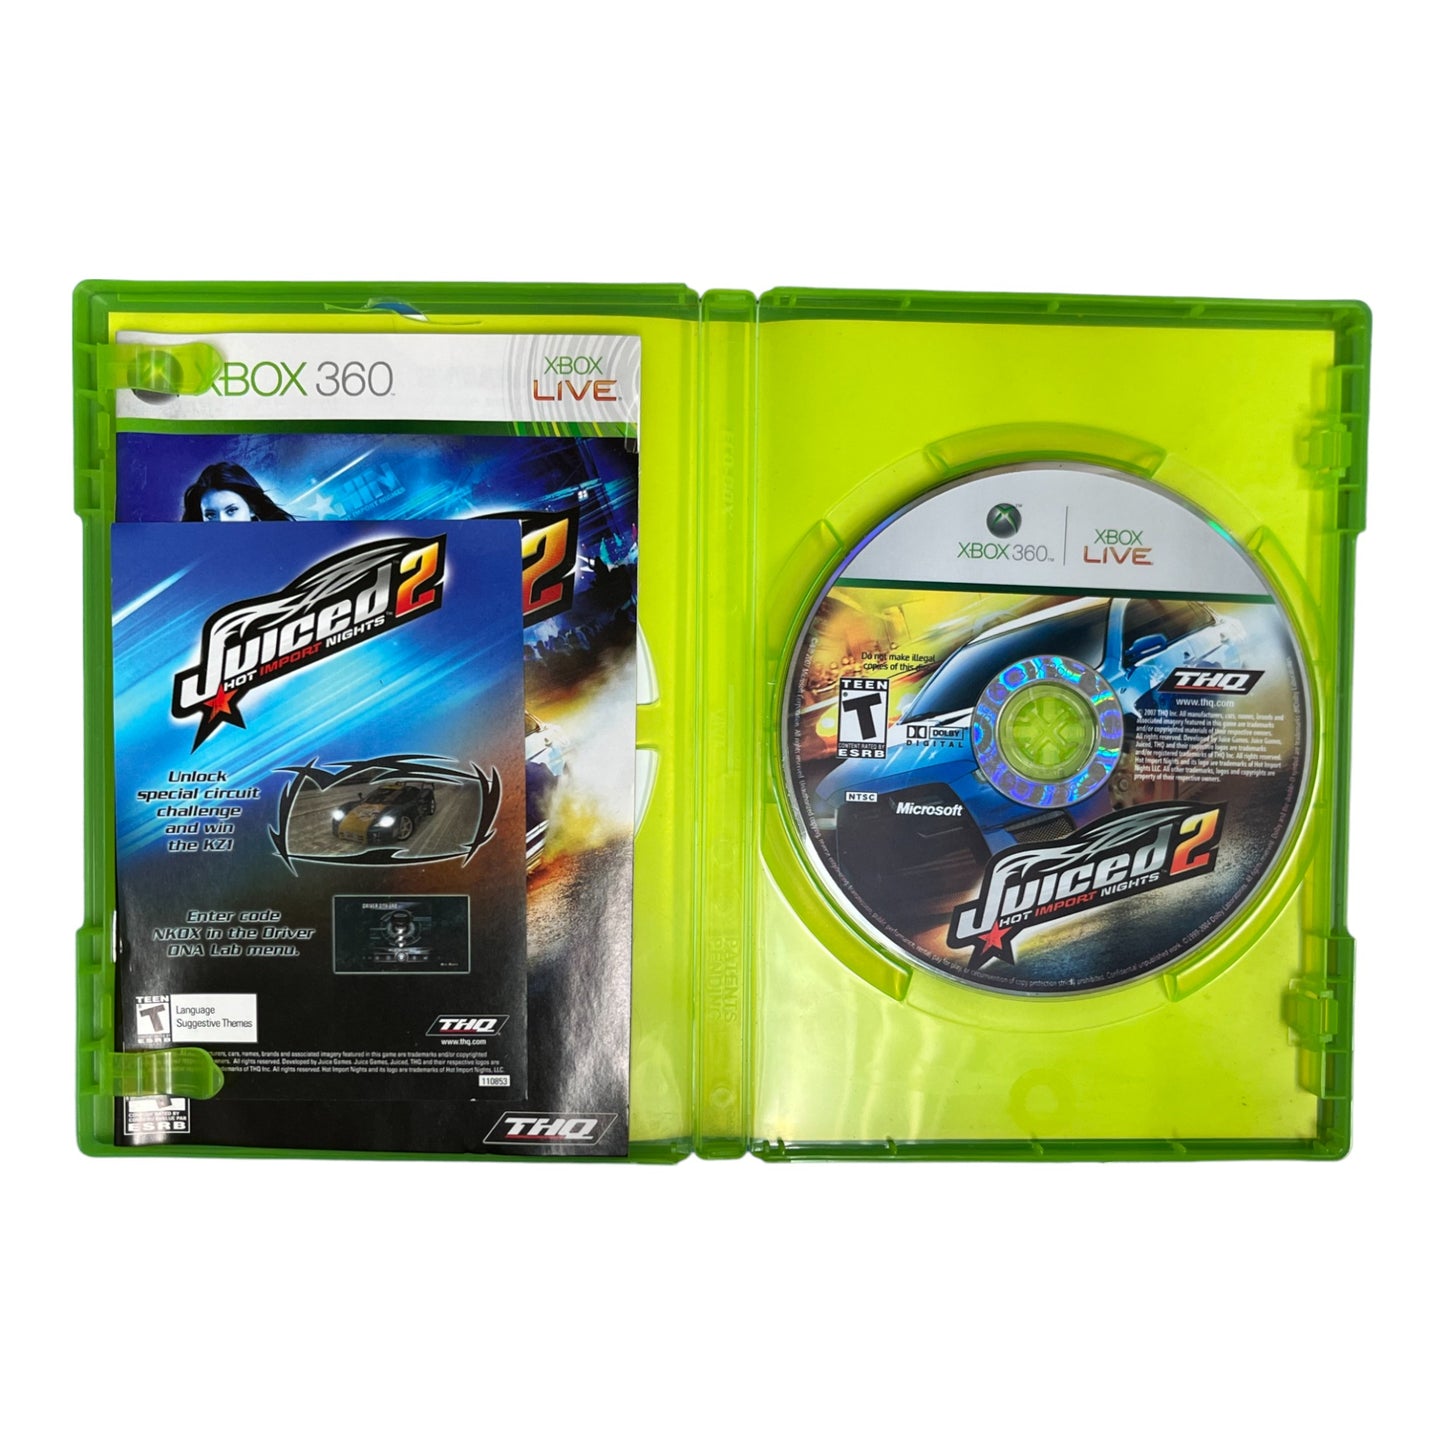 Juiced 2 Hot Import Nights (Xbox360)